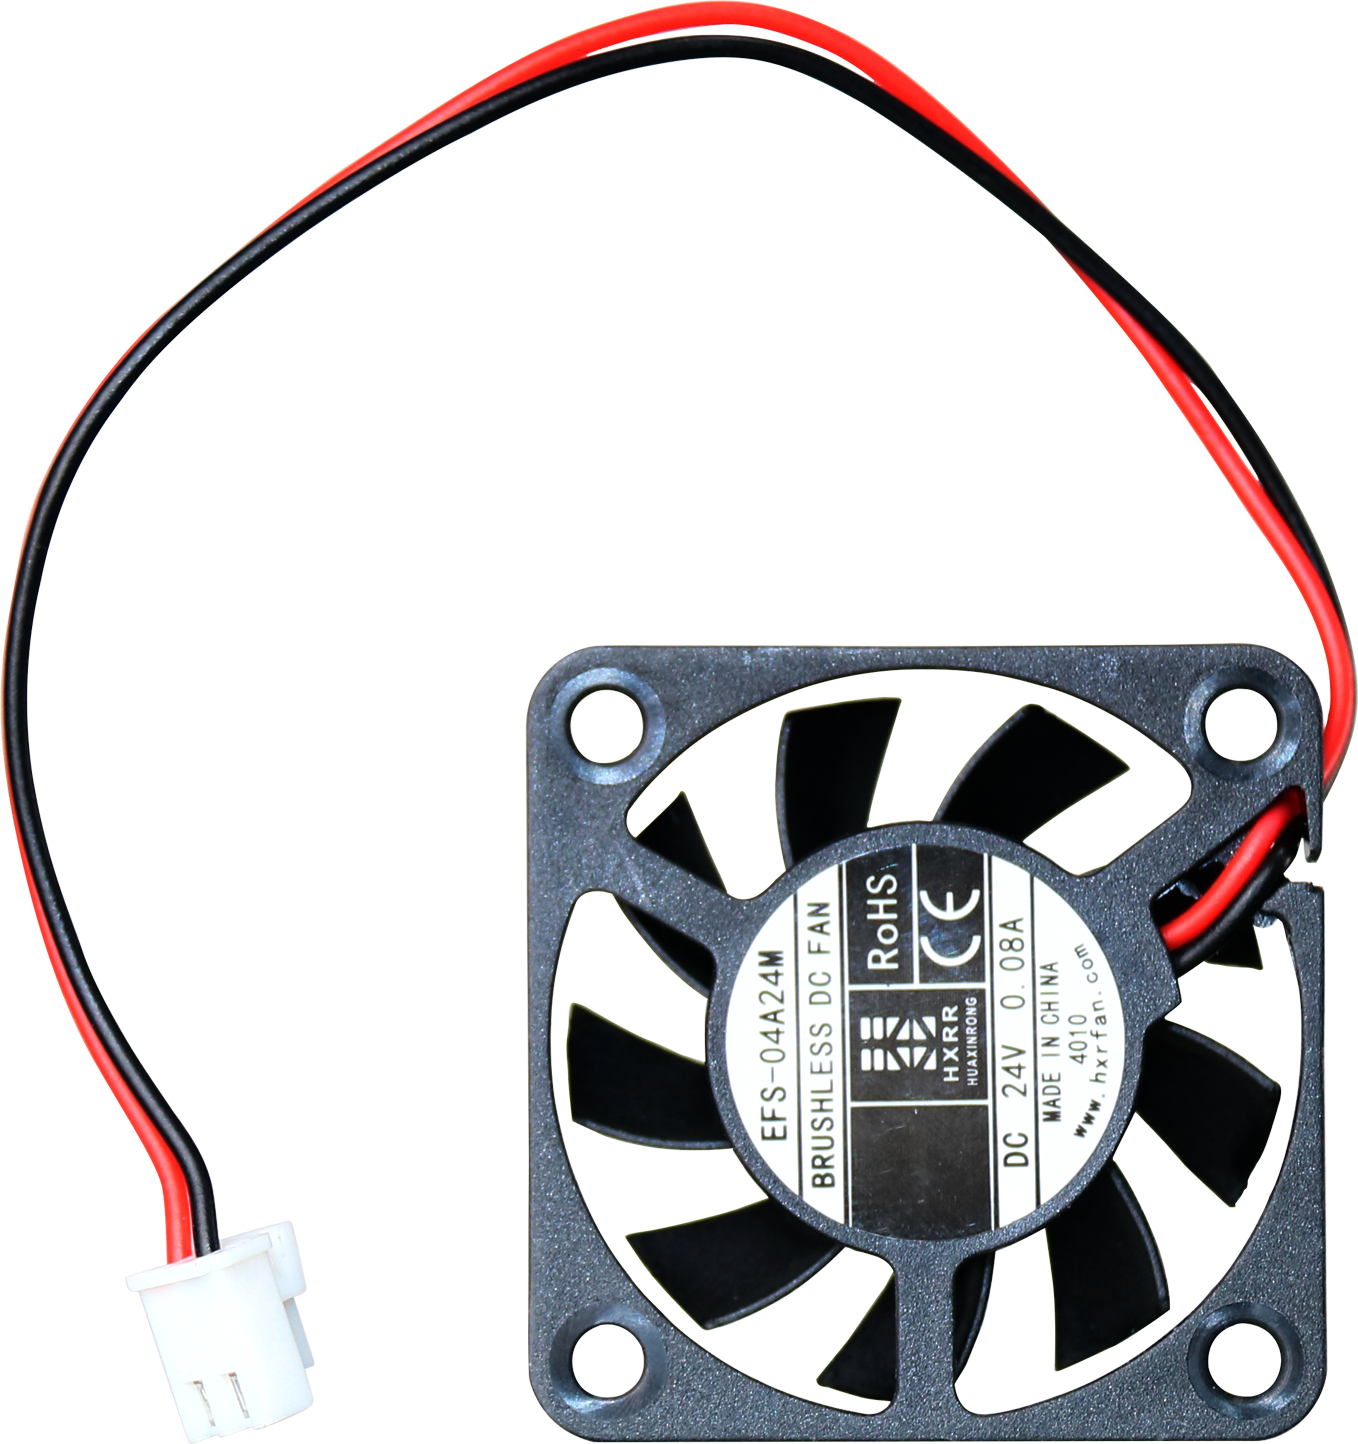 Tenlog Dual Extruder 3D Printer Cooling Fan Used for Cool Printed Object Dissipate Heat and Motherboard